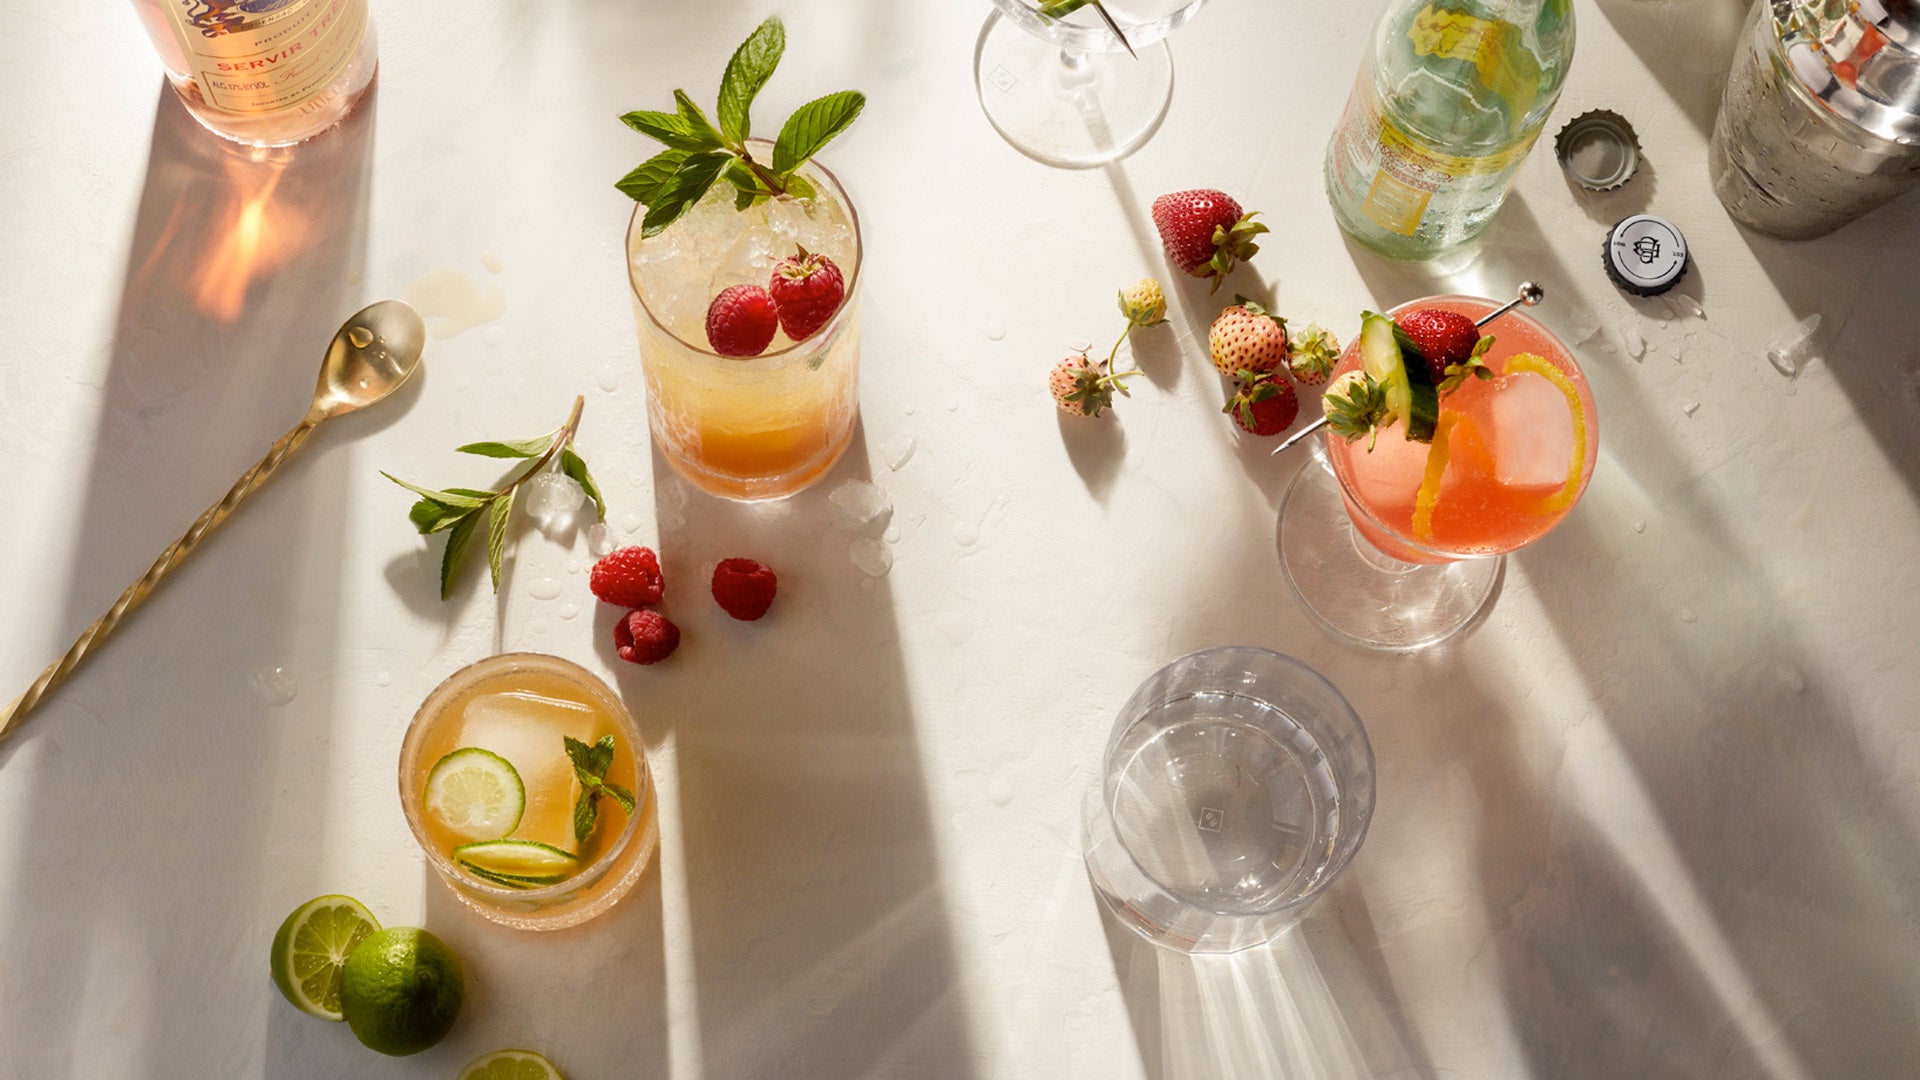 New-School Cocktail Recipes You Need to Try